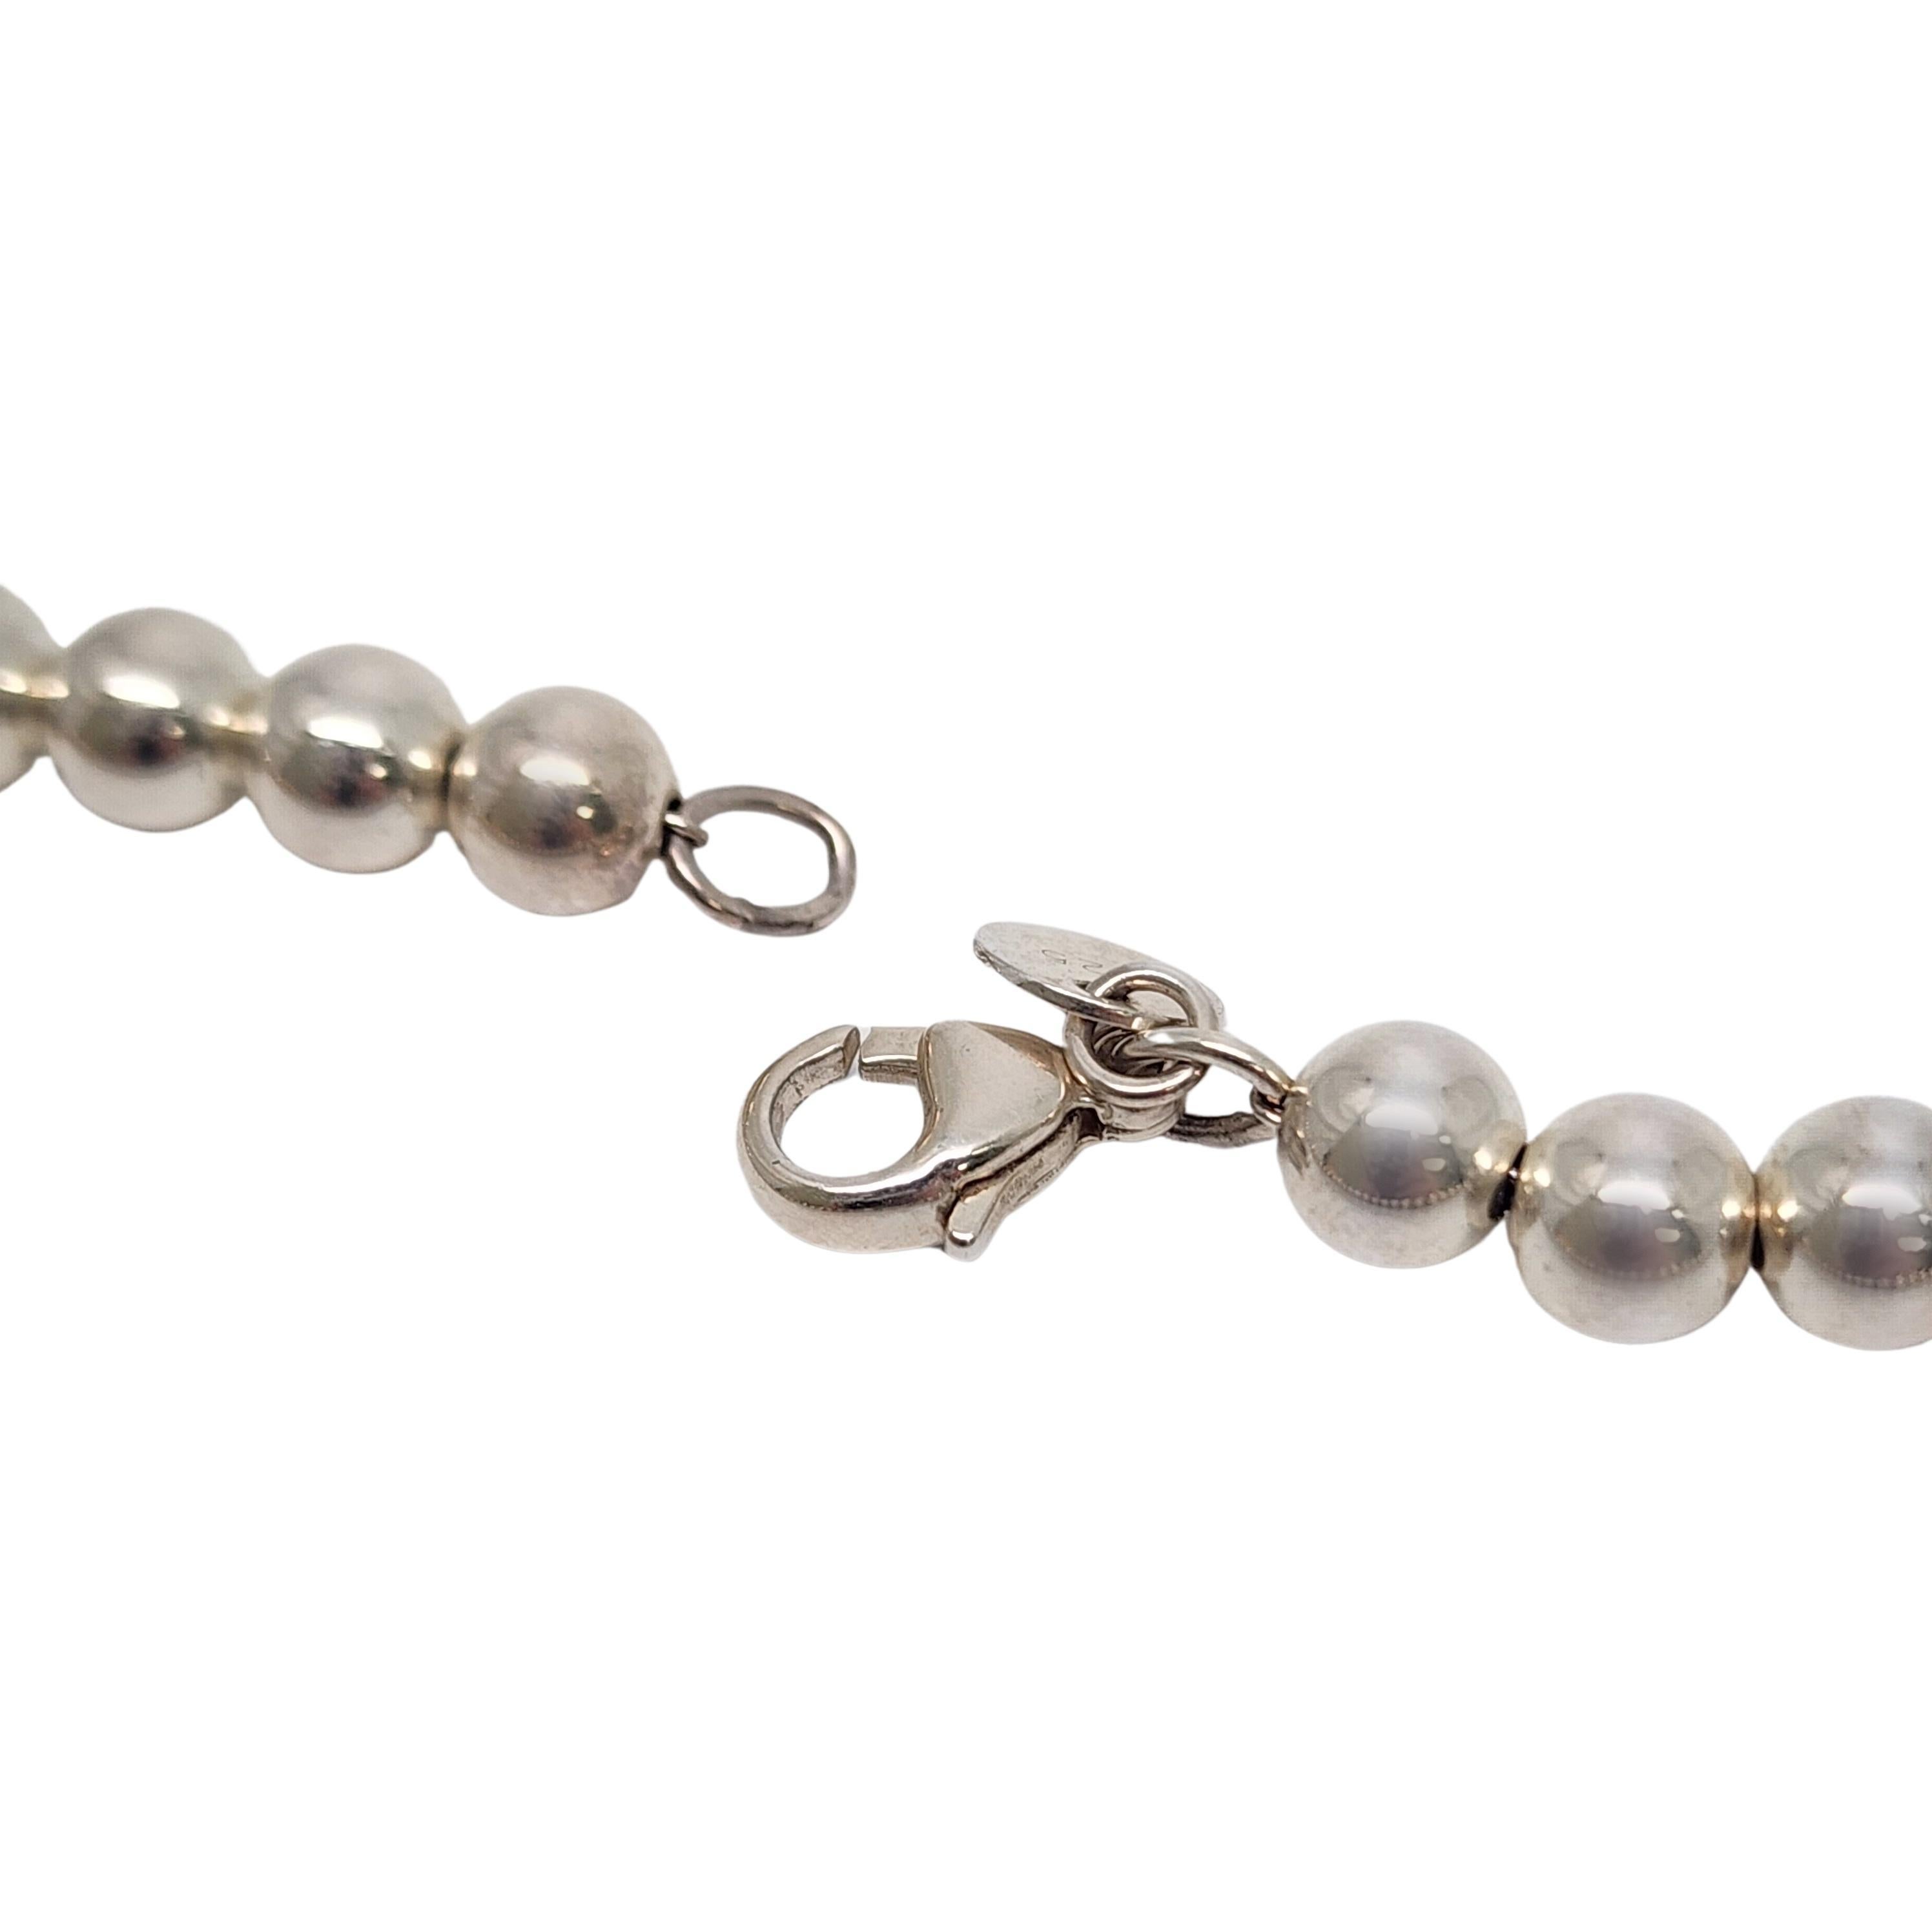 Women's Tiffany & Co Sterling Silver Graduated Ball Bead Necklace 16